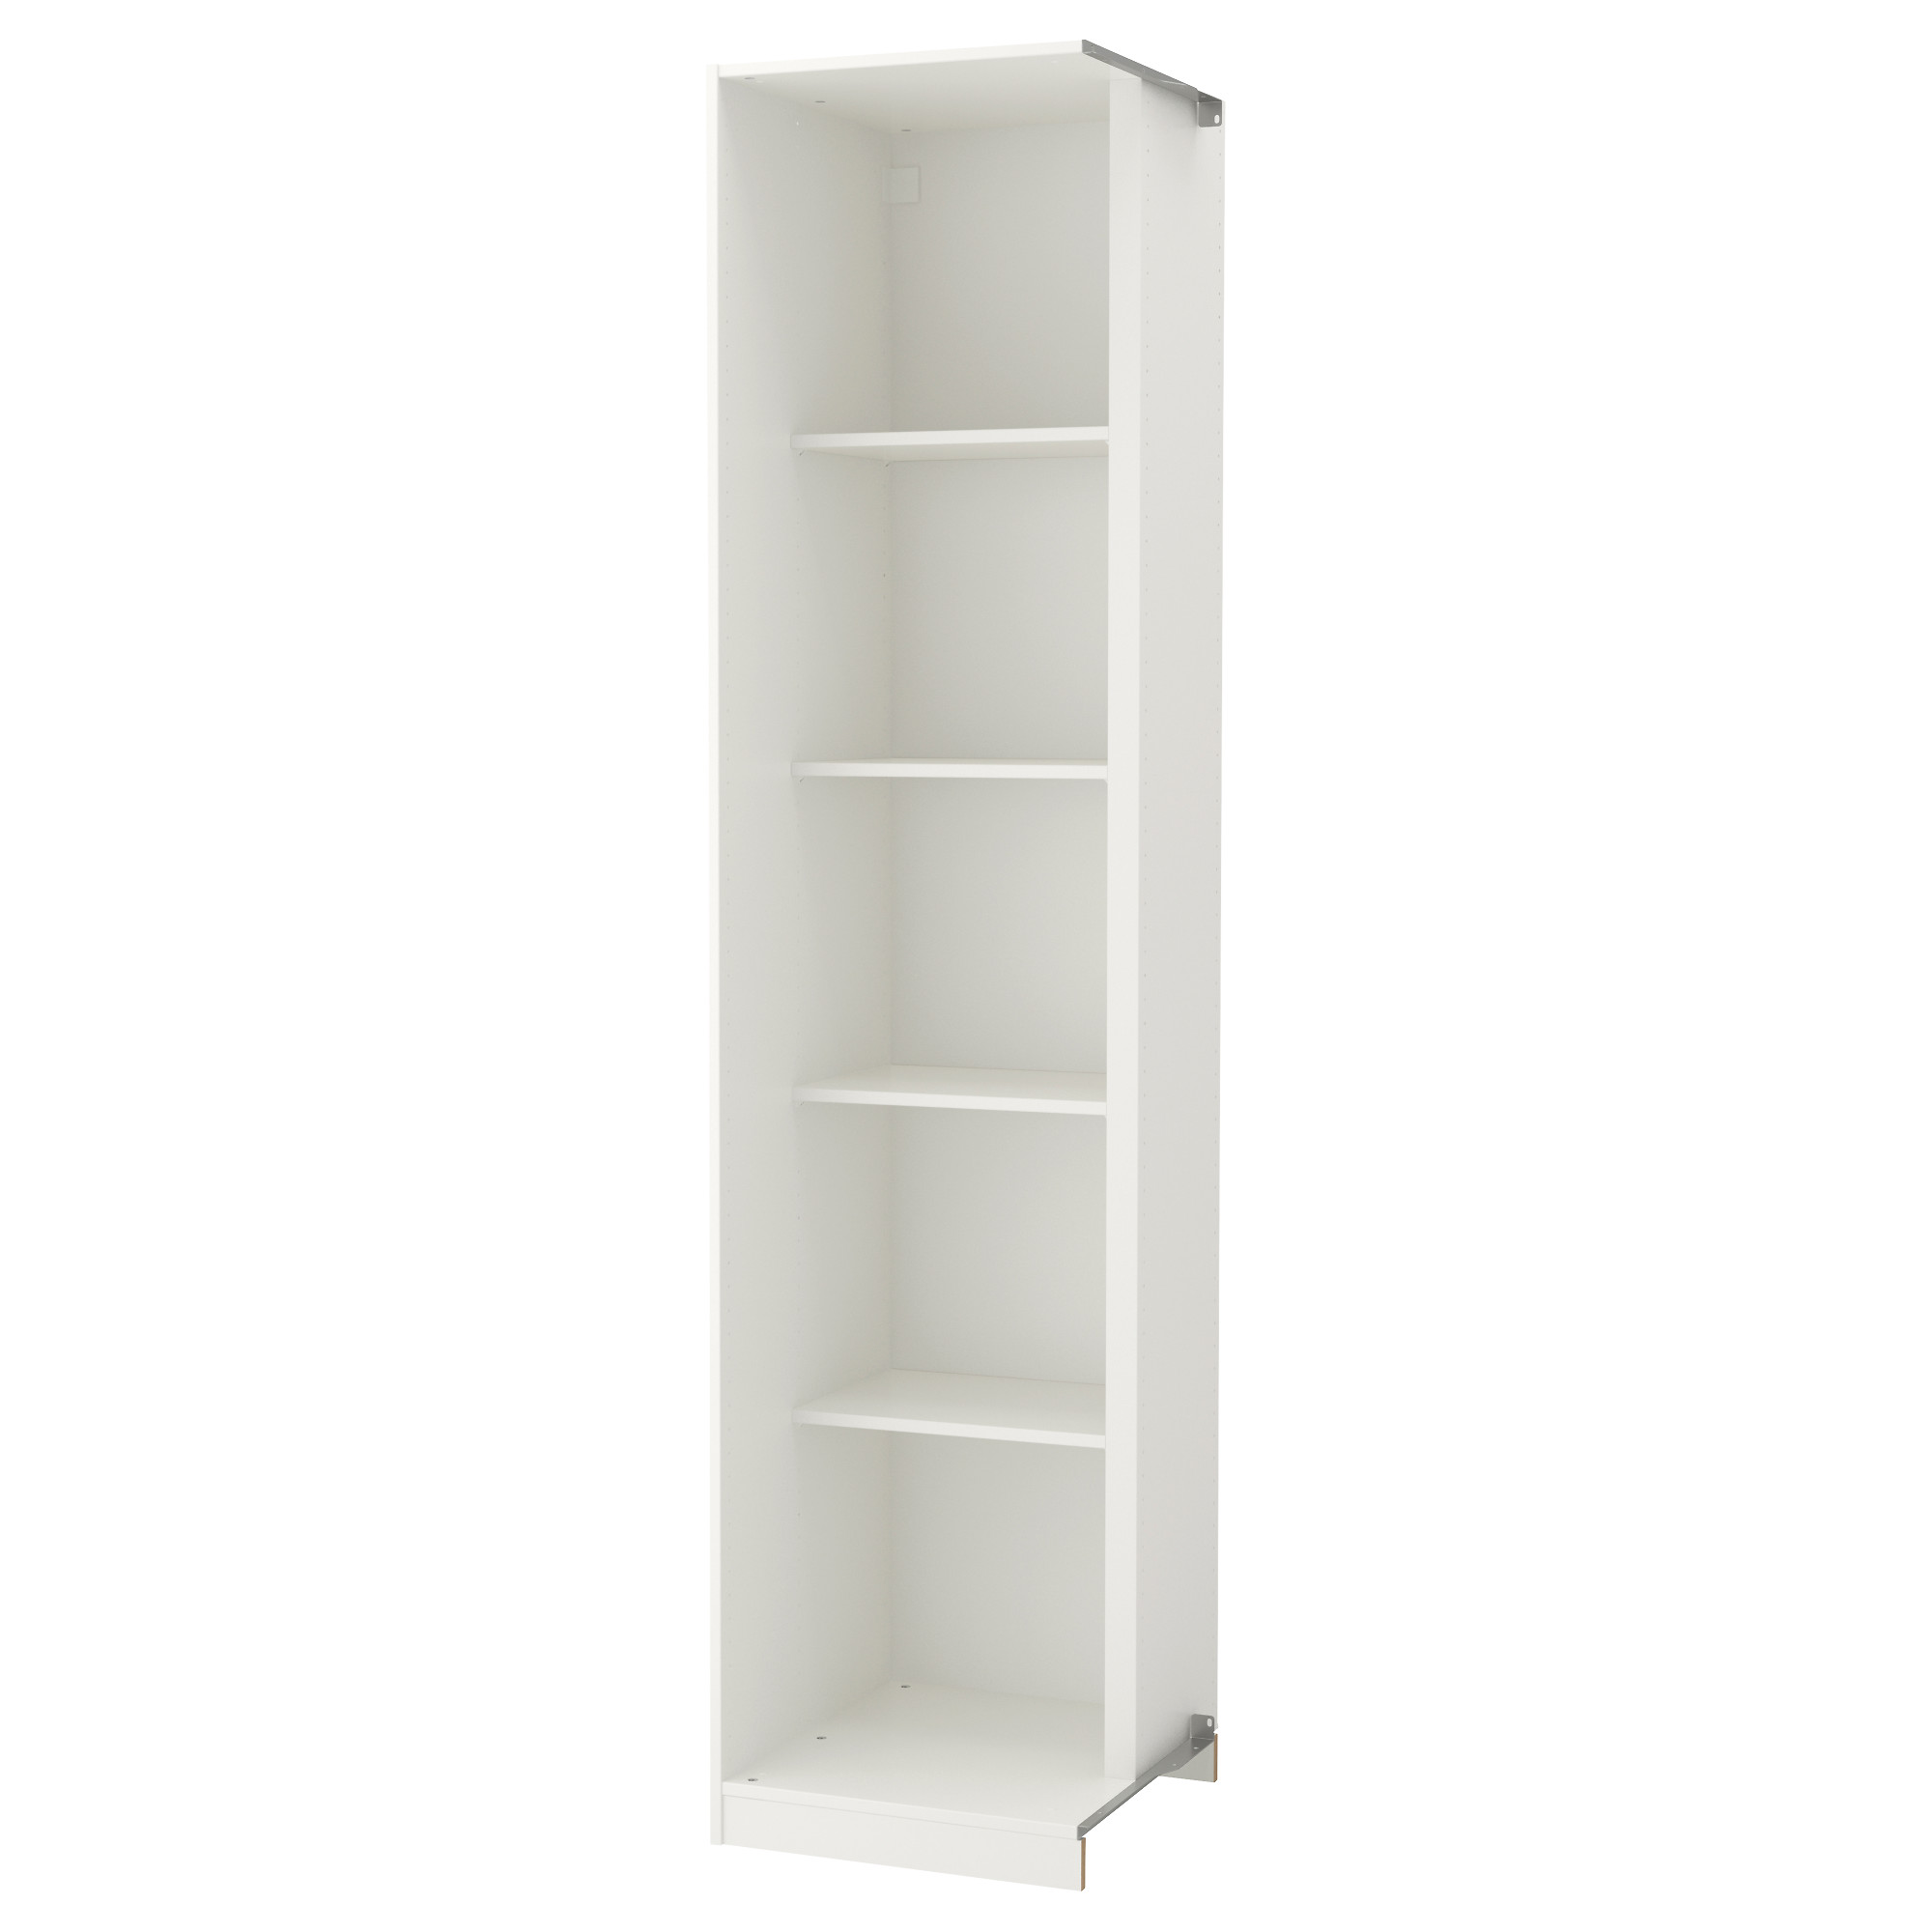 PAX add-on corner unit with 4 shelves